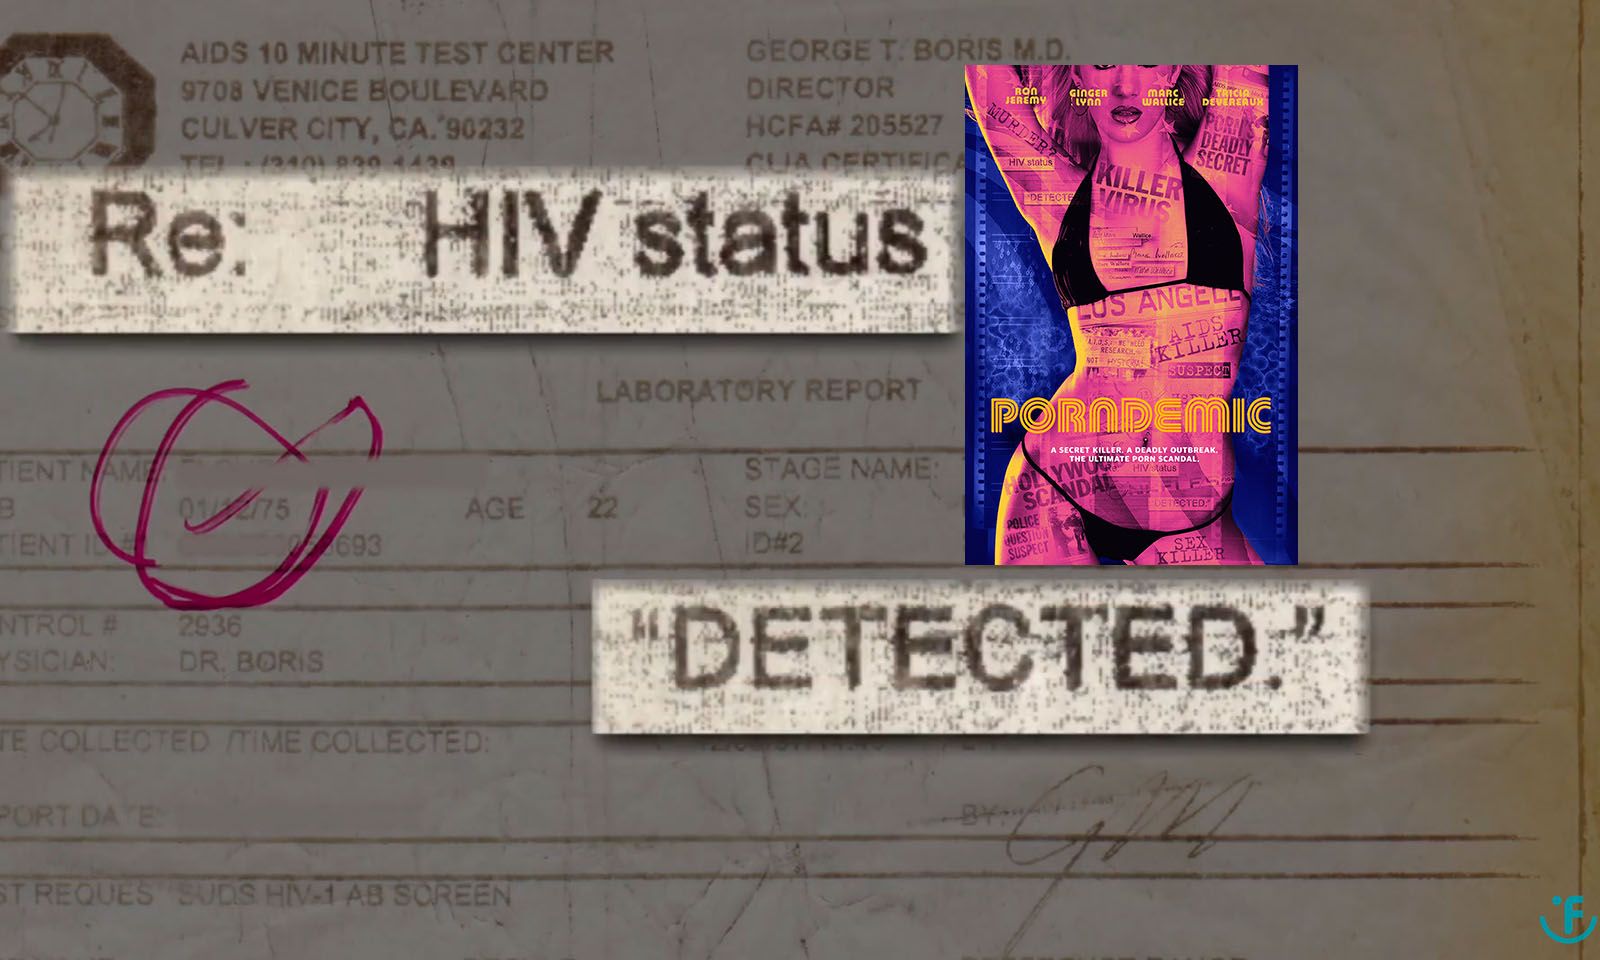 1998 HIV Documentary 'Porndemic' Now Available On VOD